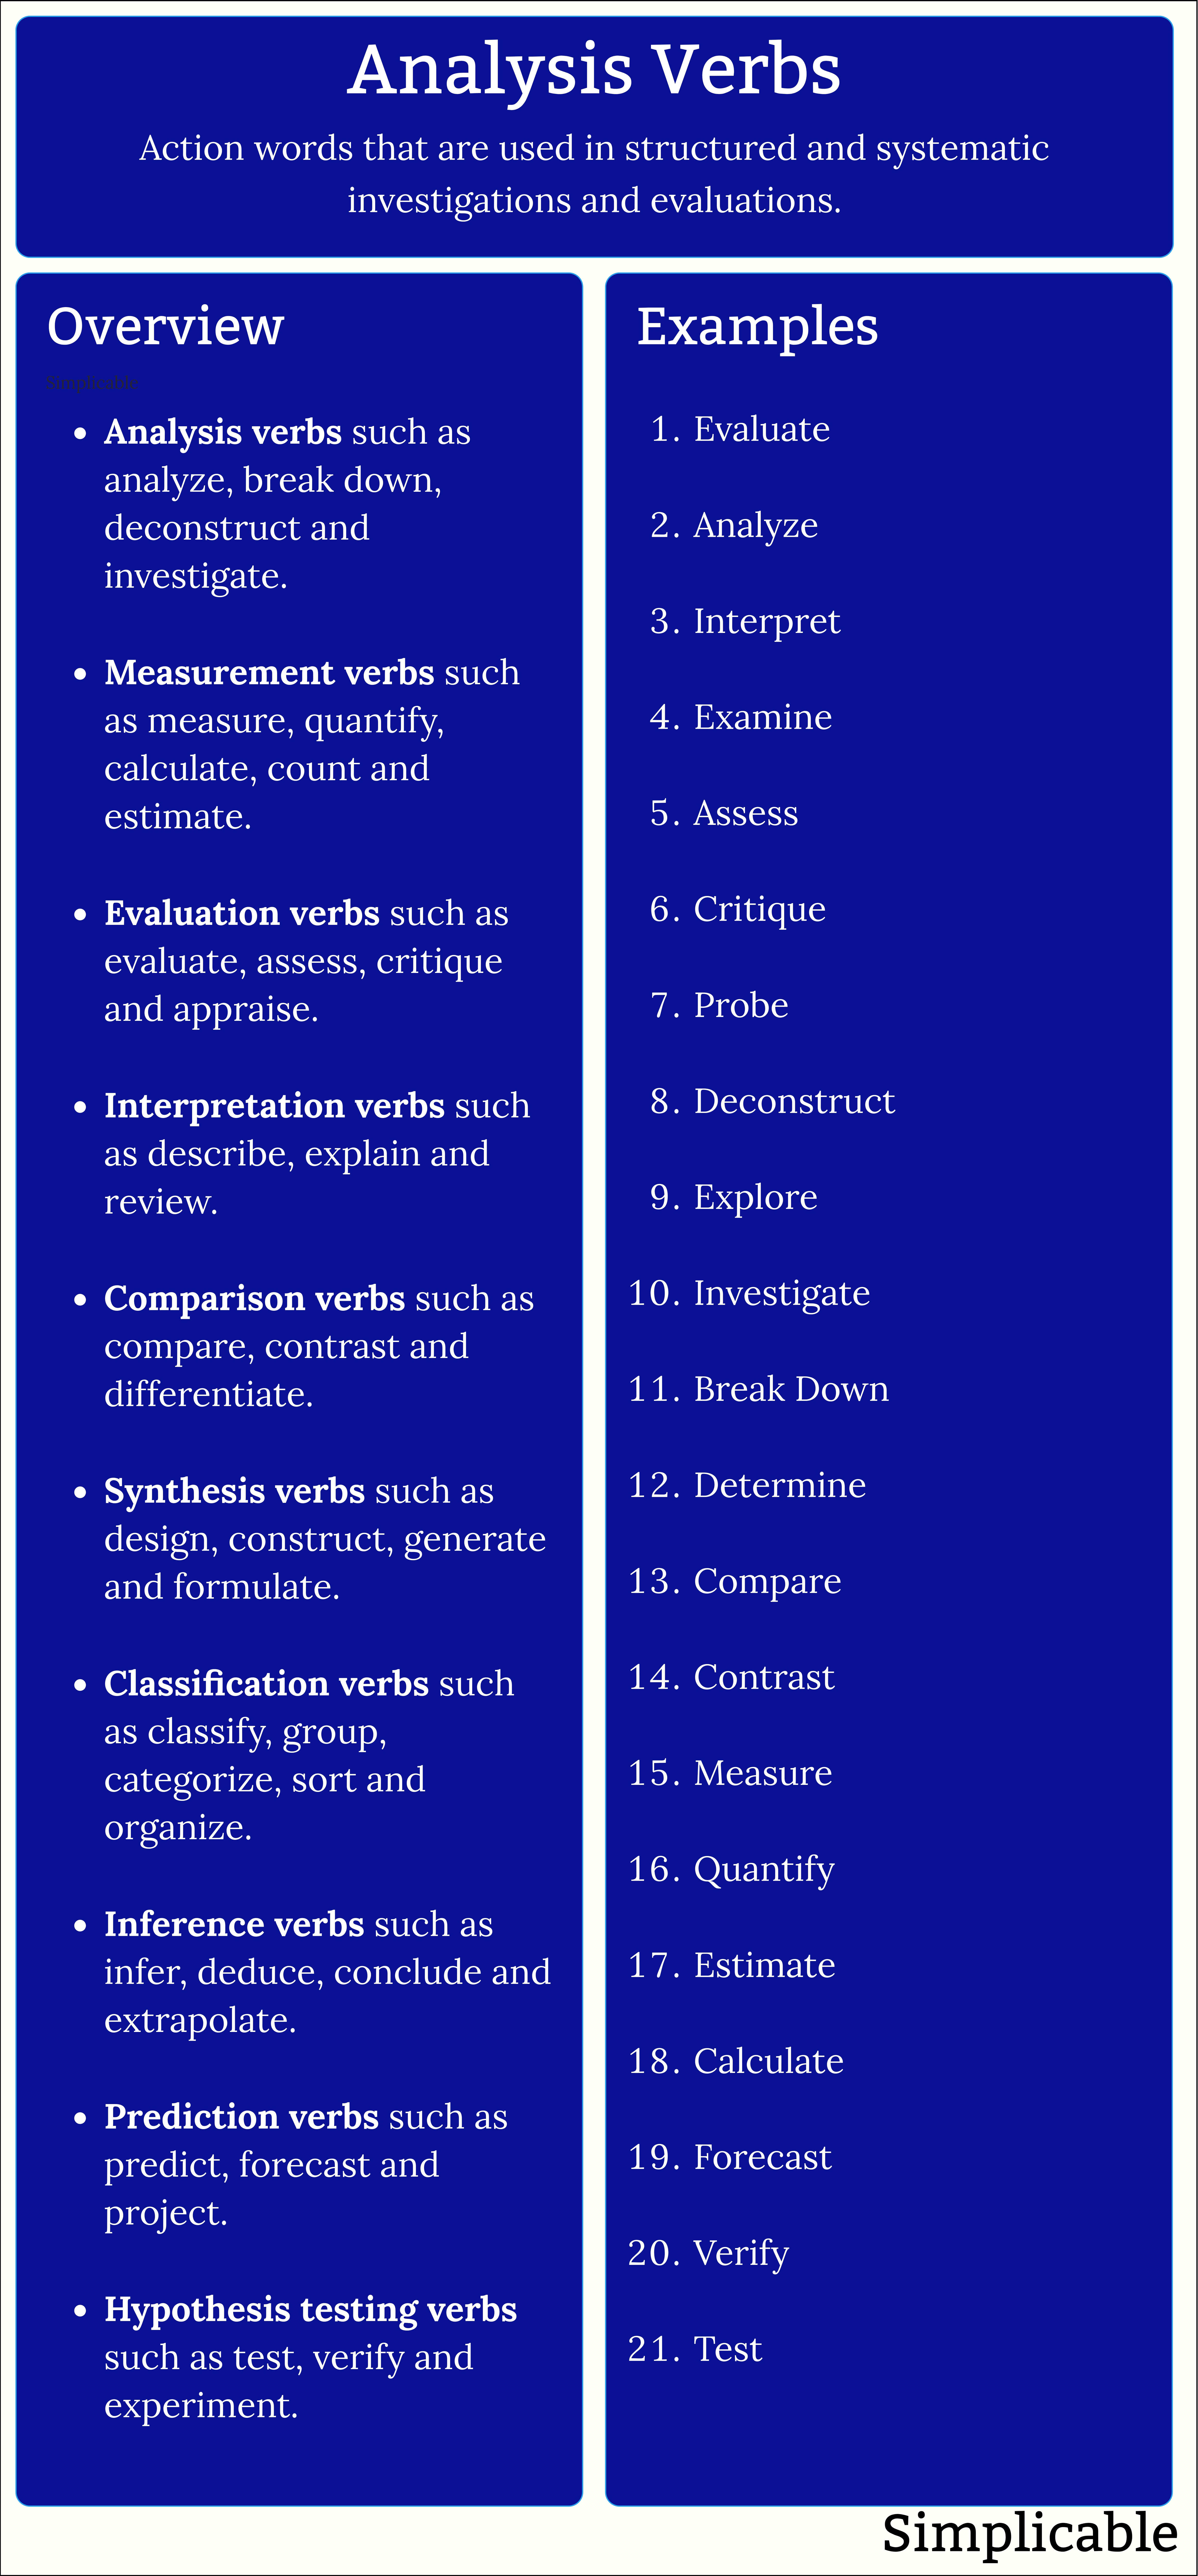 examples of analysis verbs